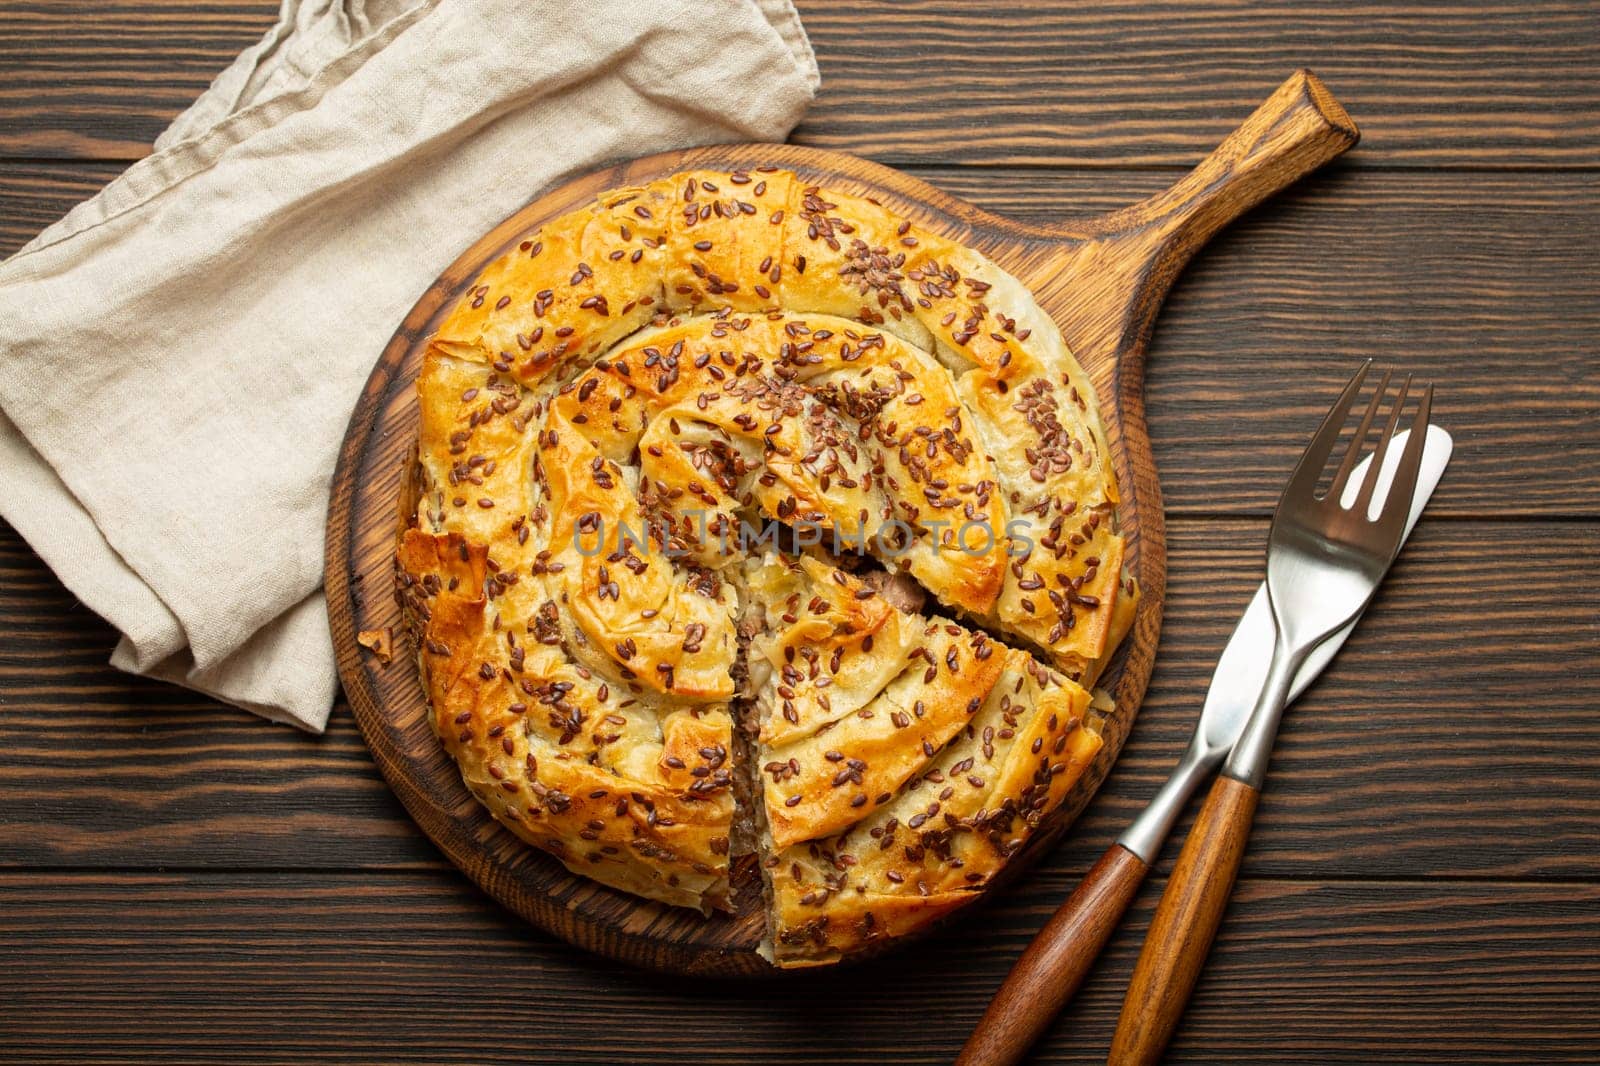 Burek with cut piece made of filo dough with filling on cutting board, dark brown wooden rustic background top view. Traditional savoury spiral pie of Balkans, Middle East and Central Asia.